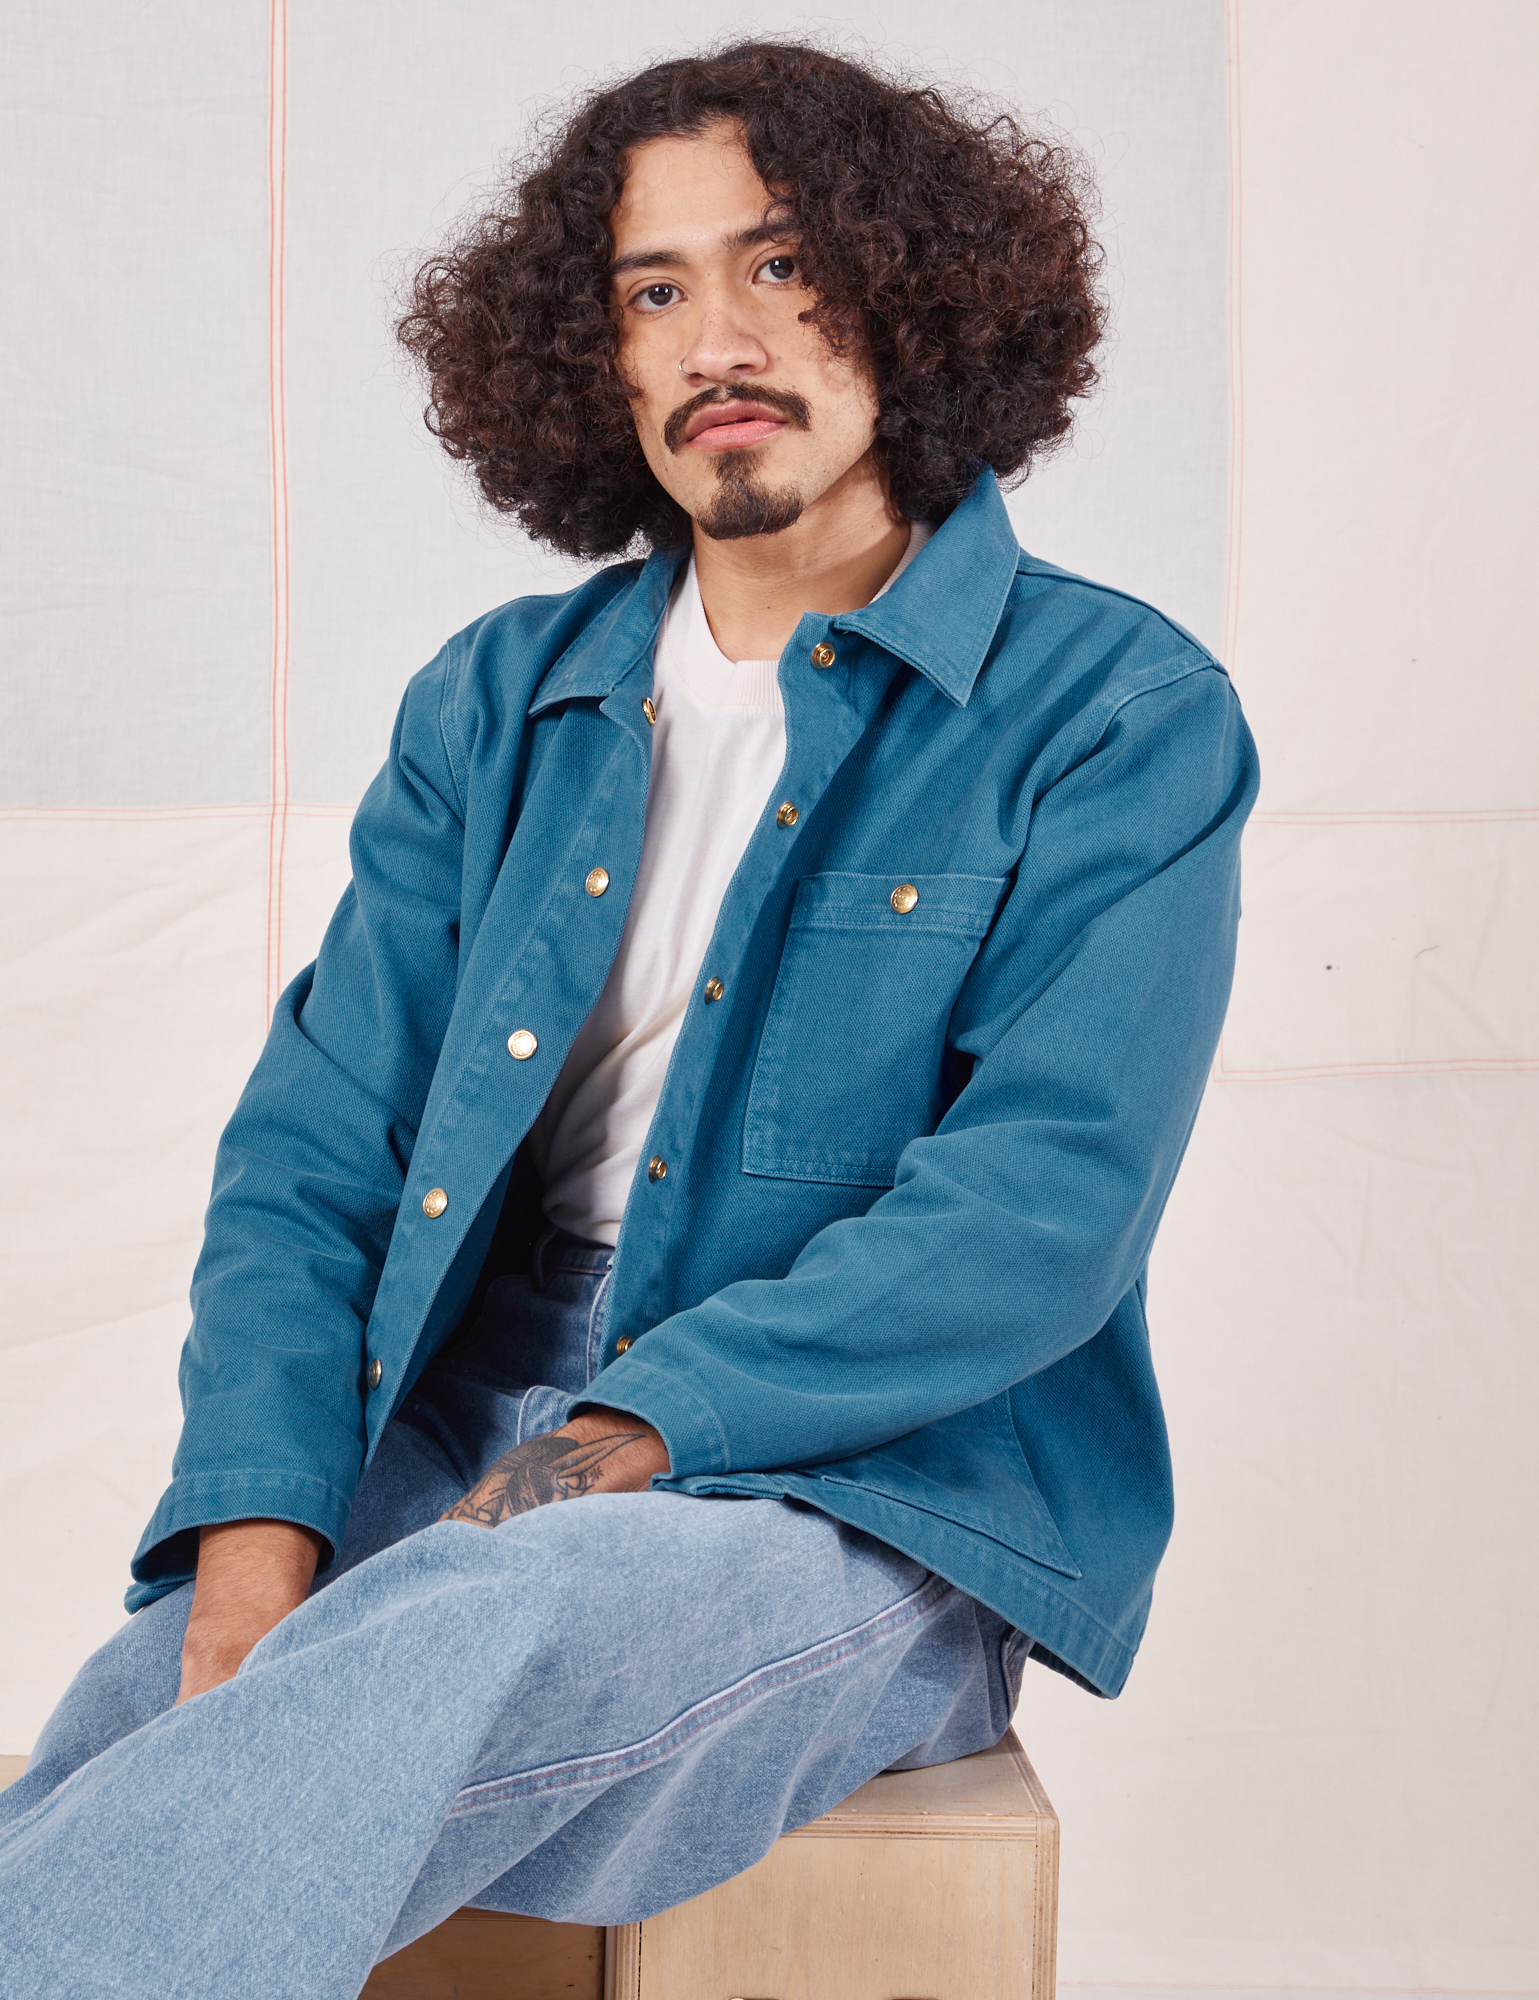 Jesse is 5&#39;8&quot; and wearing S Denim Work Jacket in Marine Blue